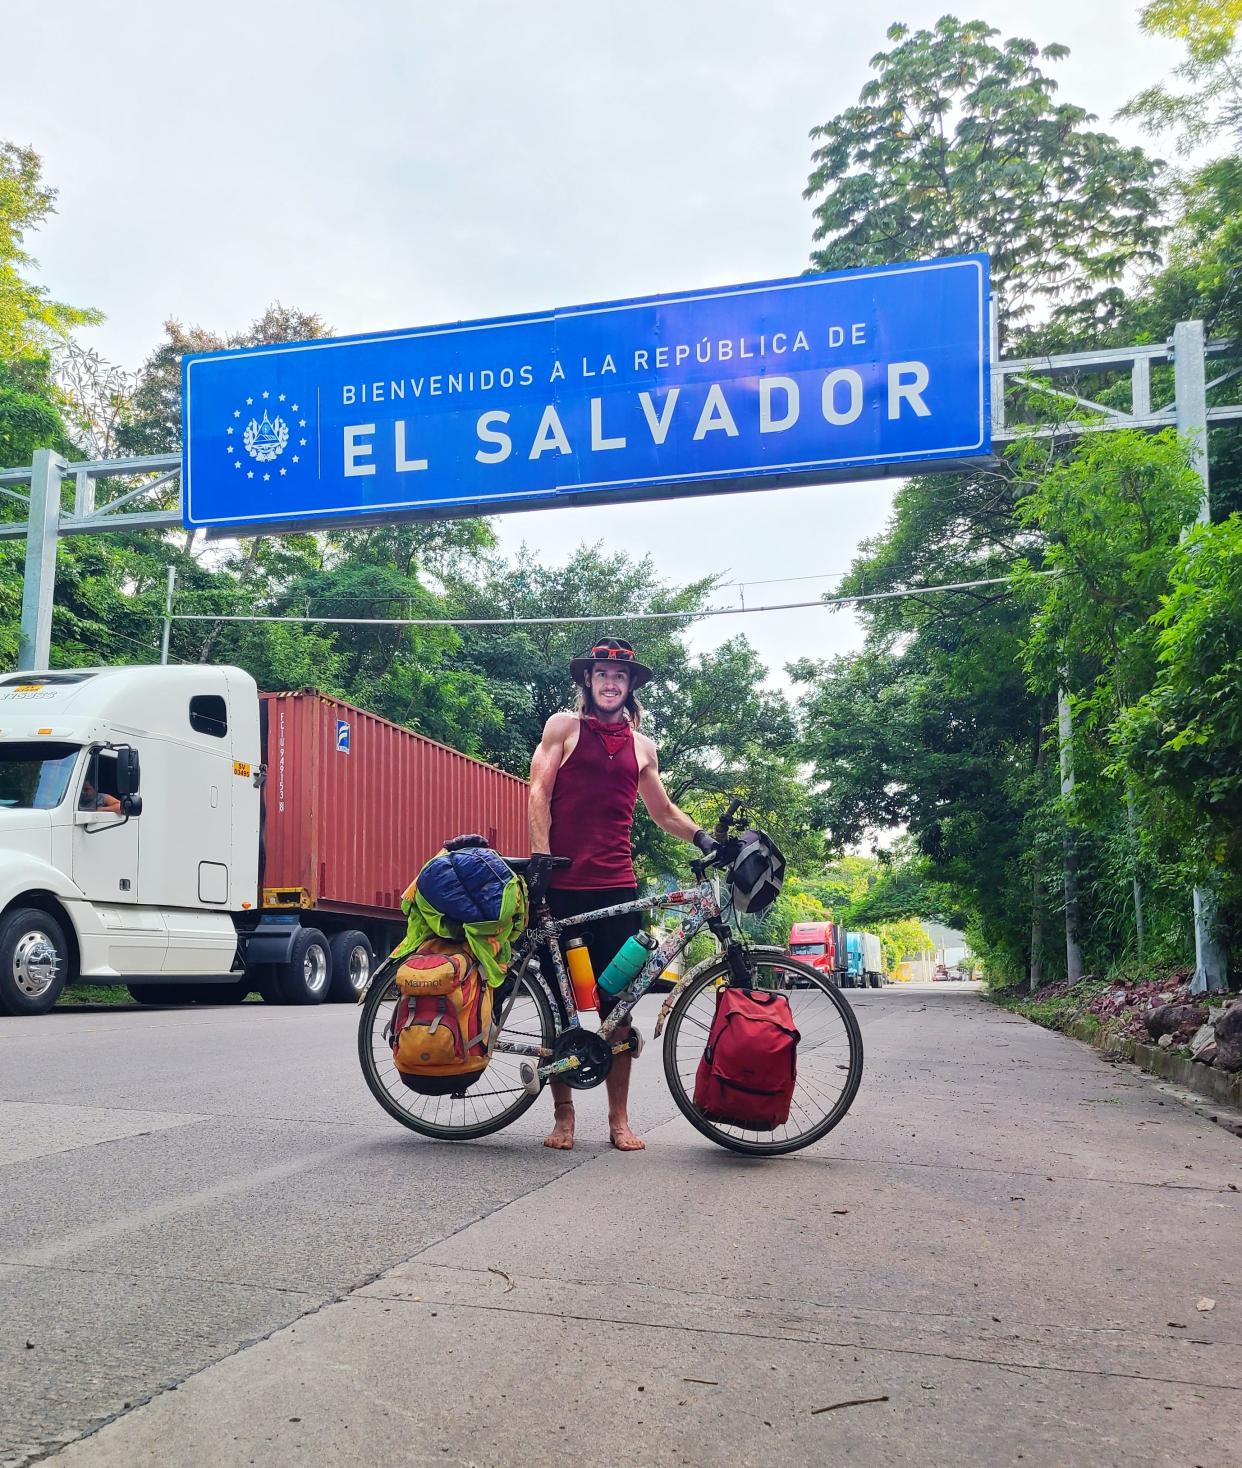 Daniel James of Canton recently completed a solo cycling trip through Central America. His travels included El Salvador.